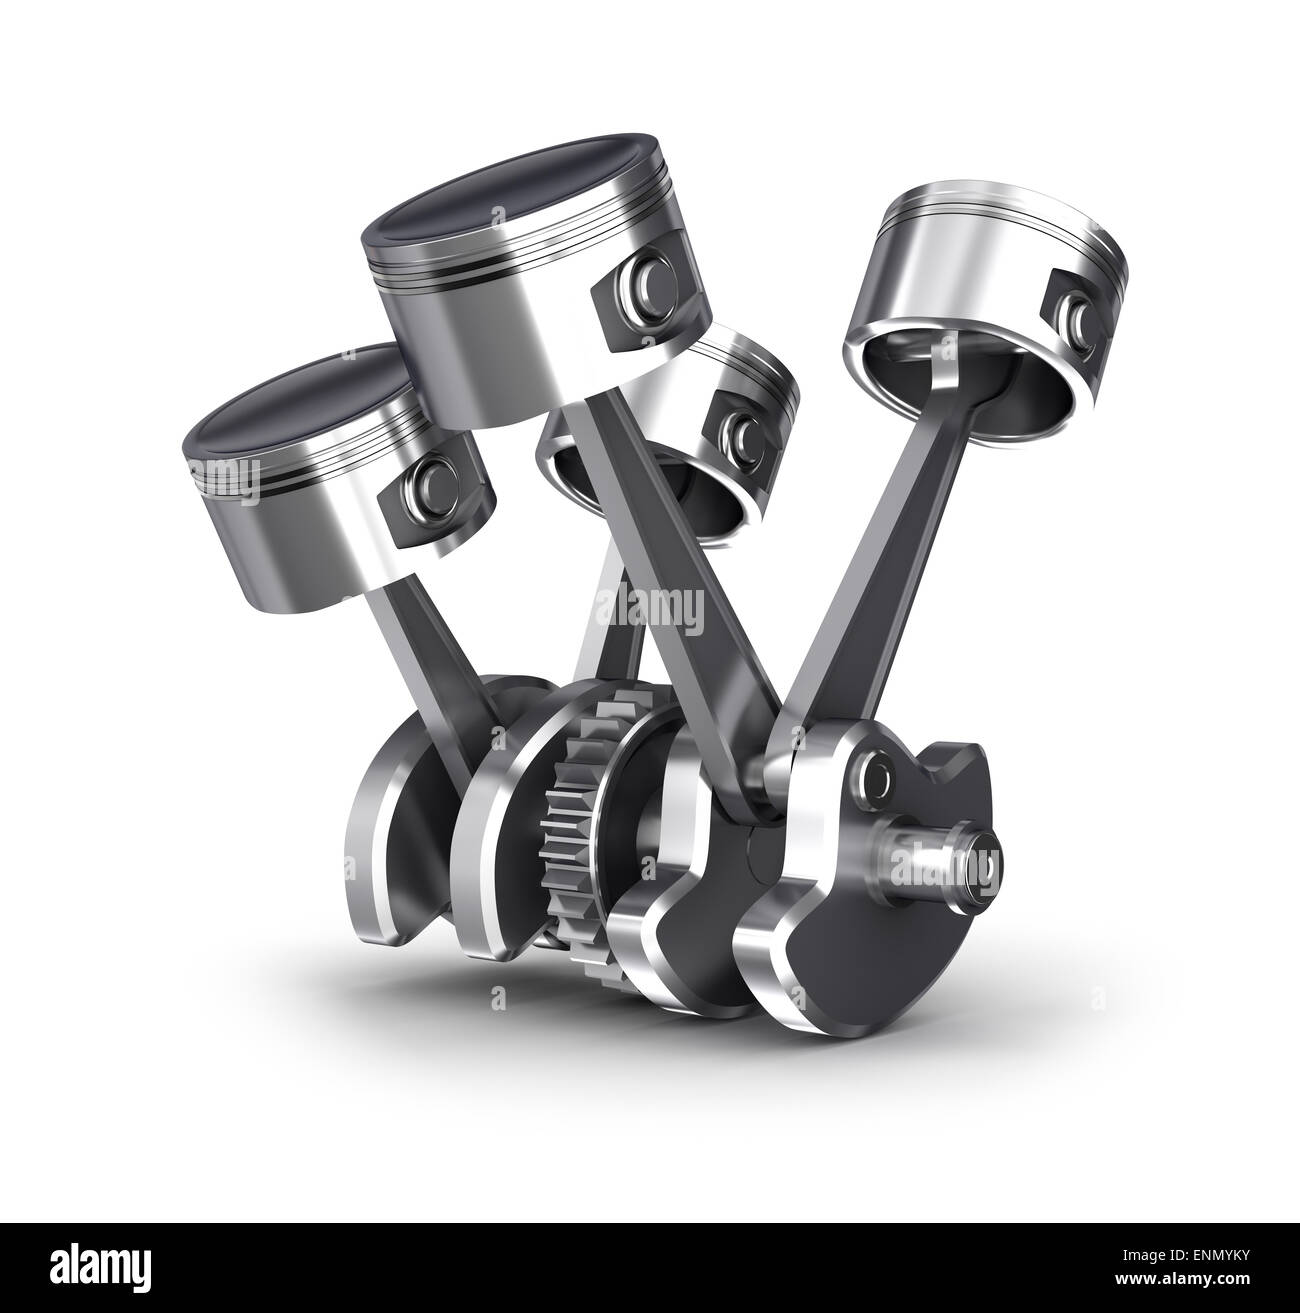 Engine pistons and cog. 3D image. Stock Photo